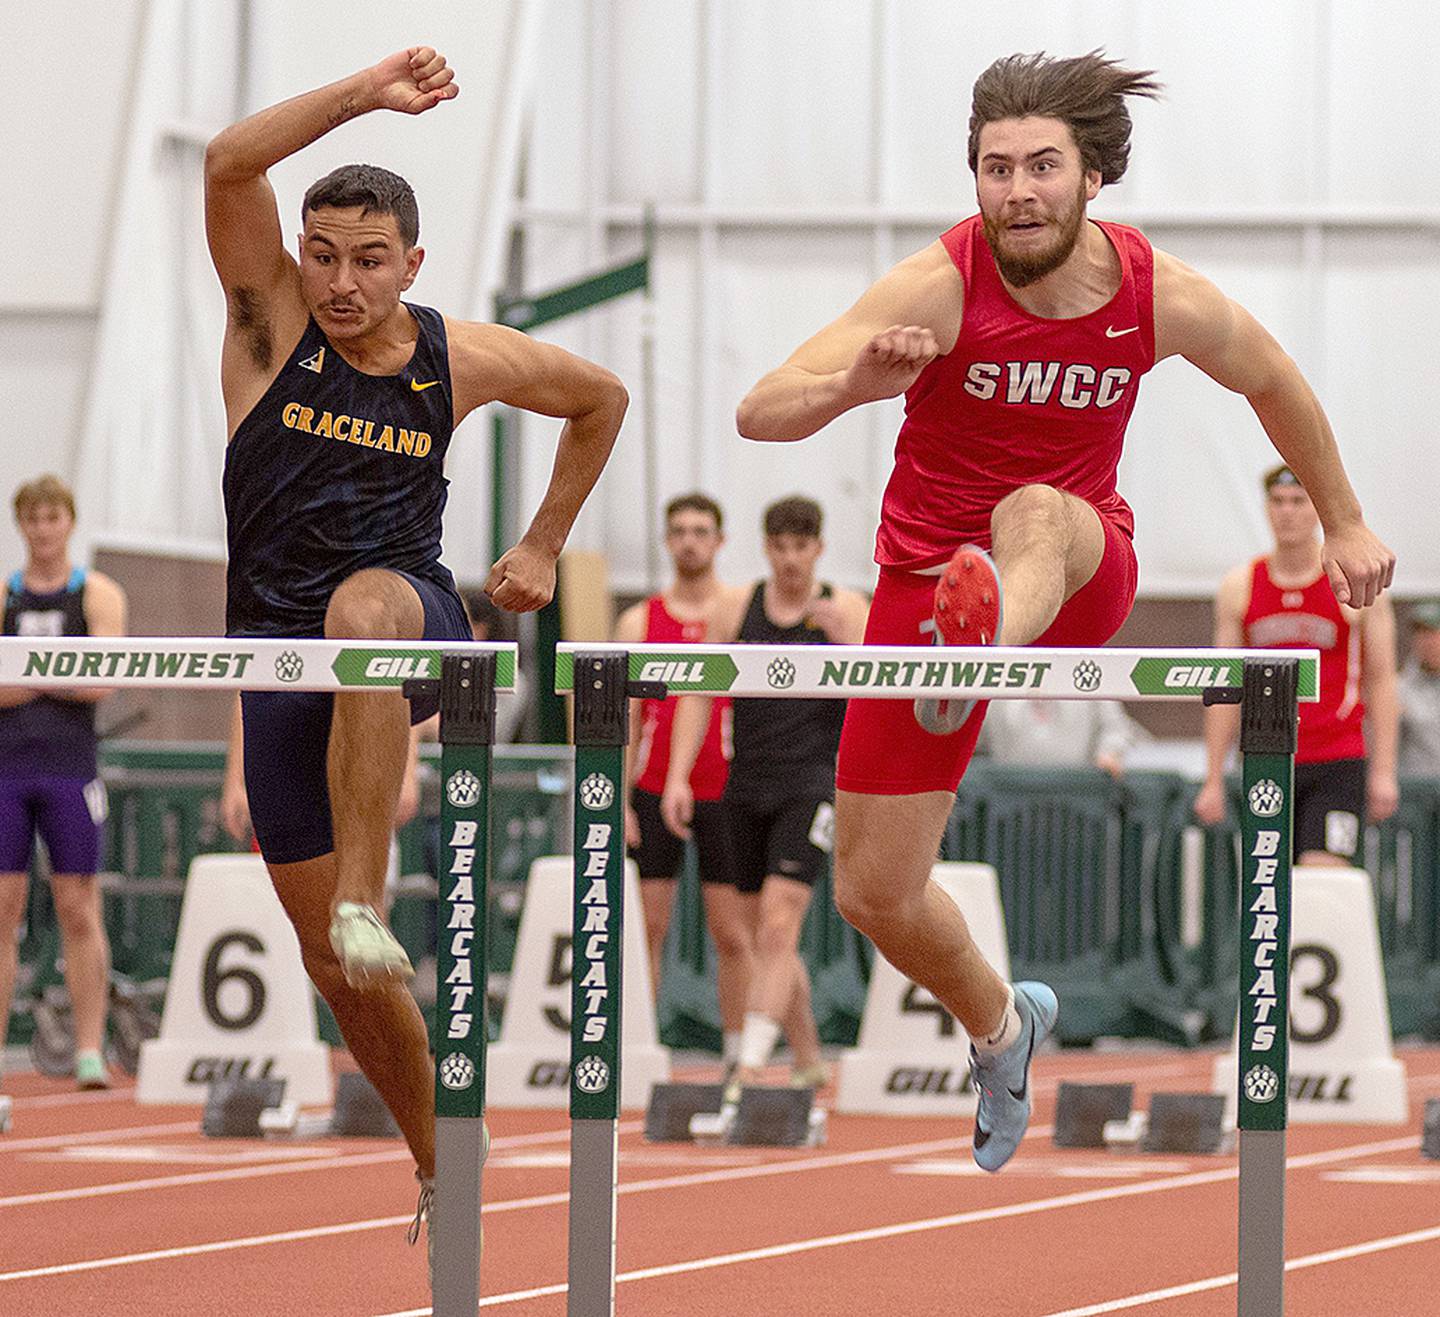 SWCC freshman Sam Foreman (right) shown competing at the Northwest Missouri State indoor meet, ran the 60-meter hurdles at the NJCAA national meet in Gainesville, Florida. He set the school record of 8.68 seconds at Maryville.